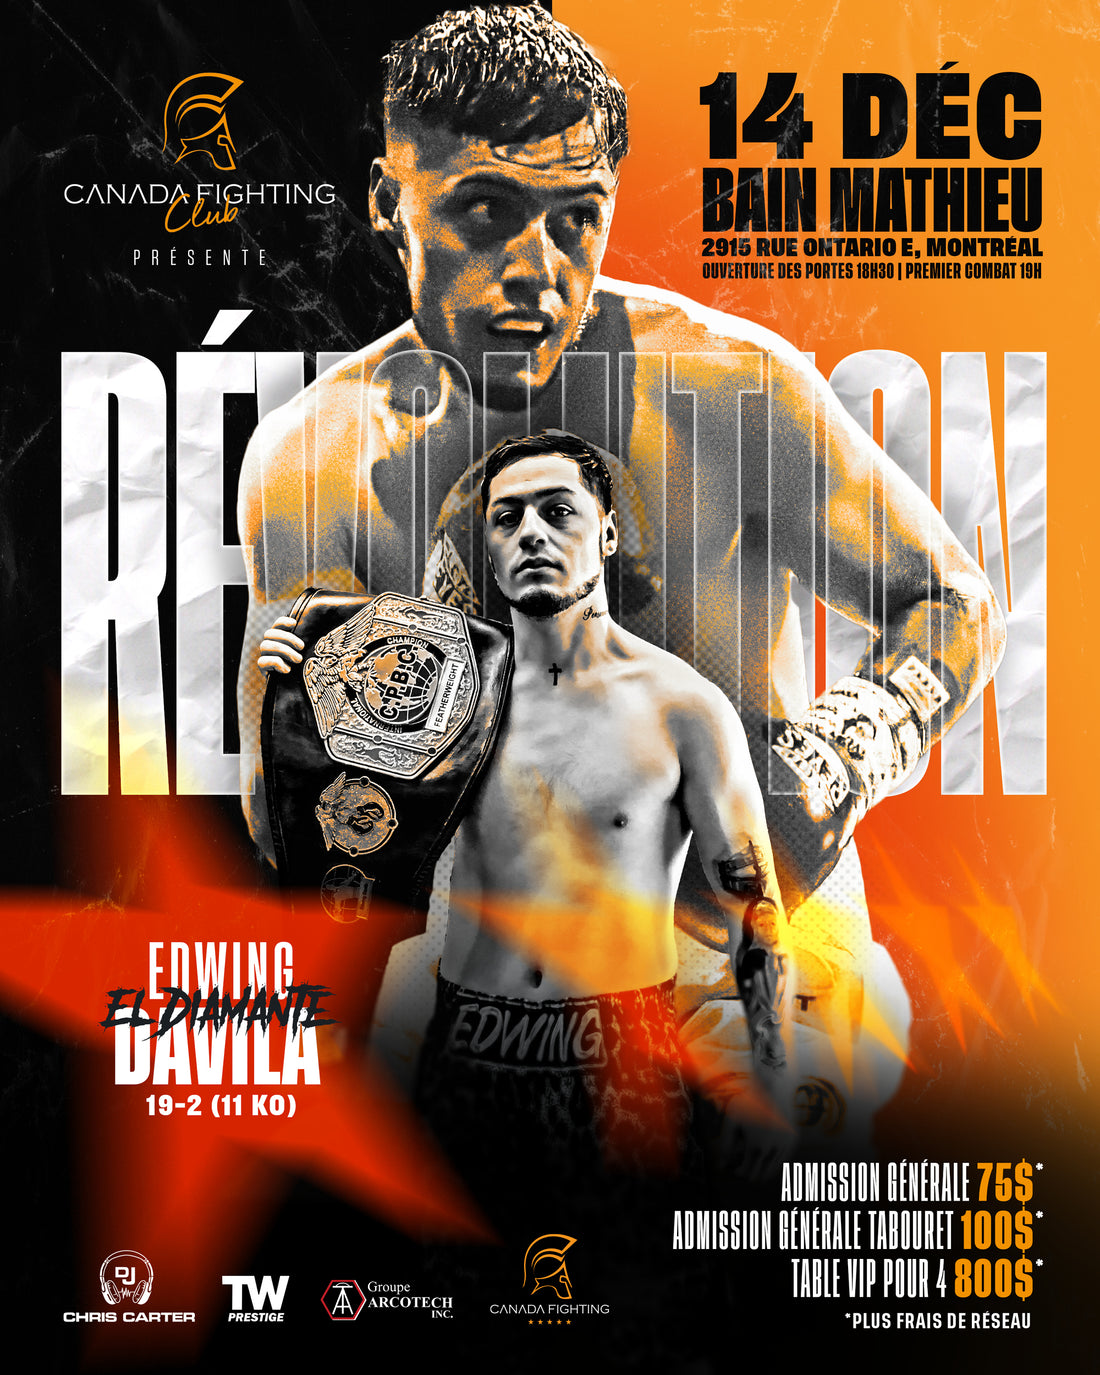 Canada Fighting Club unveils its headliner for the “Revolution” gala on December 14.